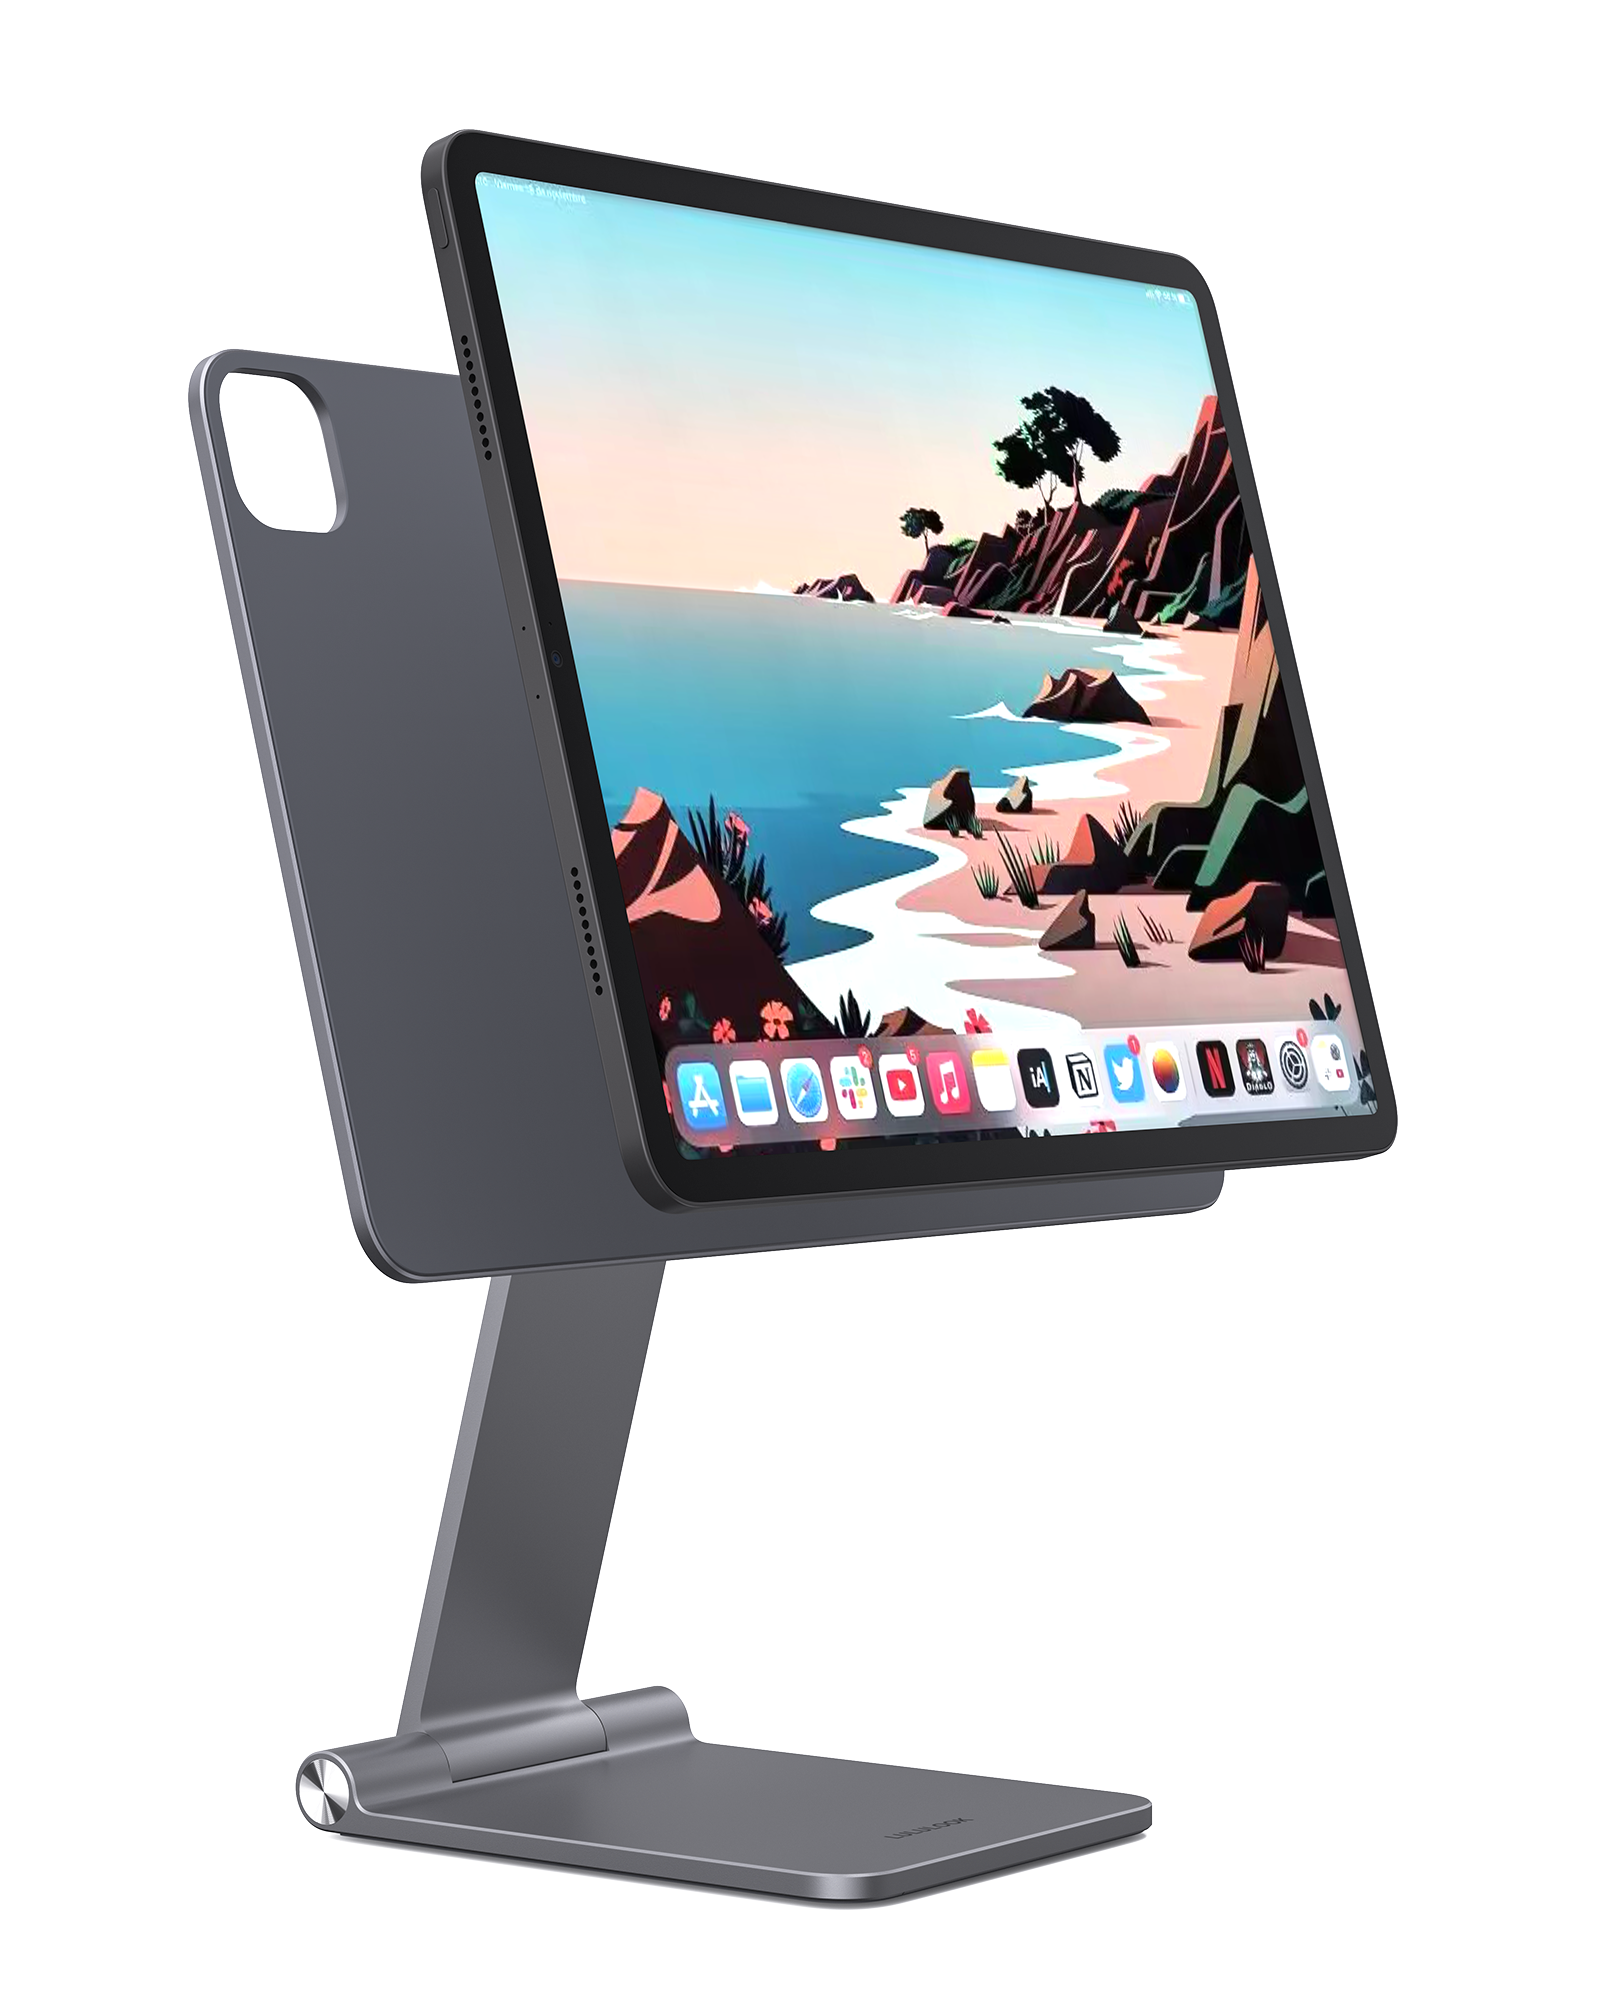 iPad Stand Swivel,Aluminum Portable 360°Rotating Tablet iPad Stand Holder  for Desk,Business,Kitchen,Desktop - Silver